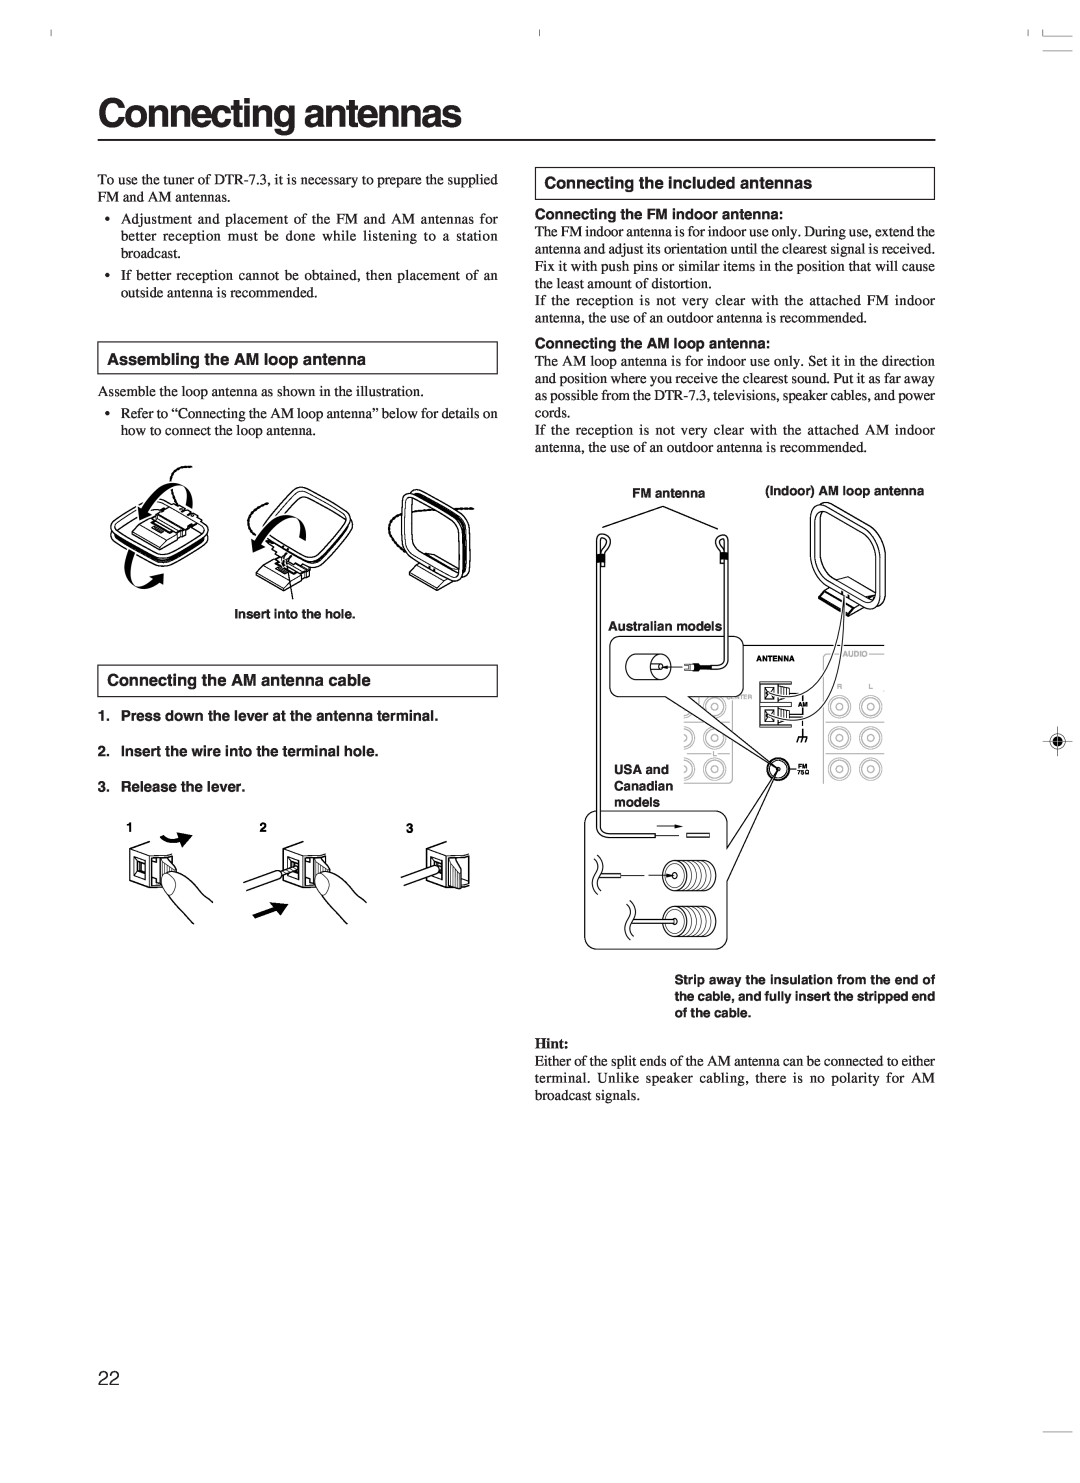 Integra DTR-7.3 instruction manual Connecting antennas, Assembling the AM loop antenna, Connecting the AM antenna cable 